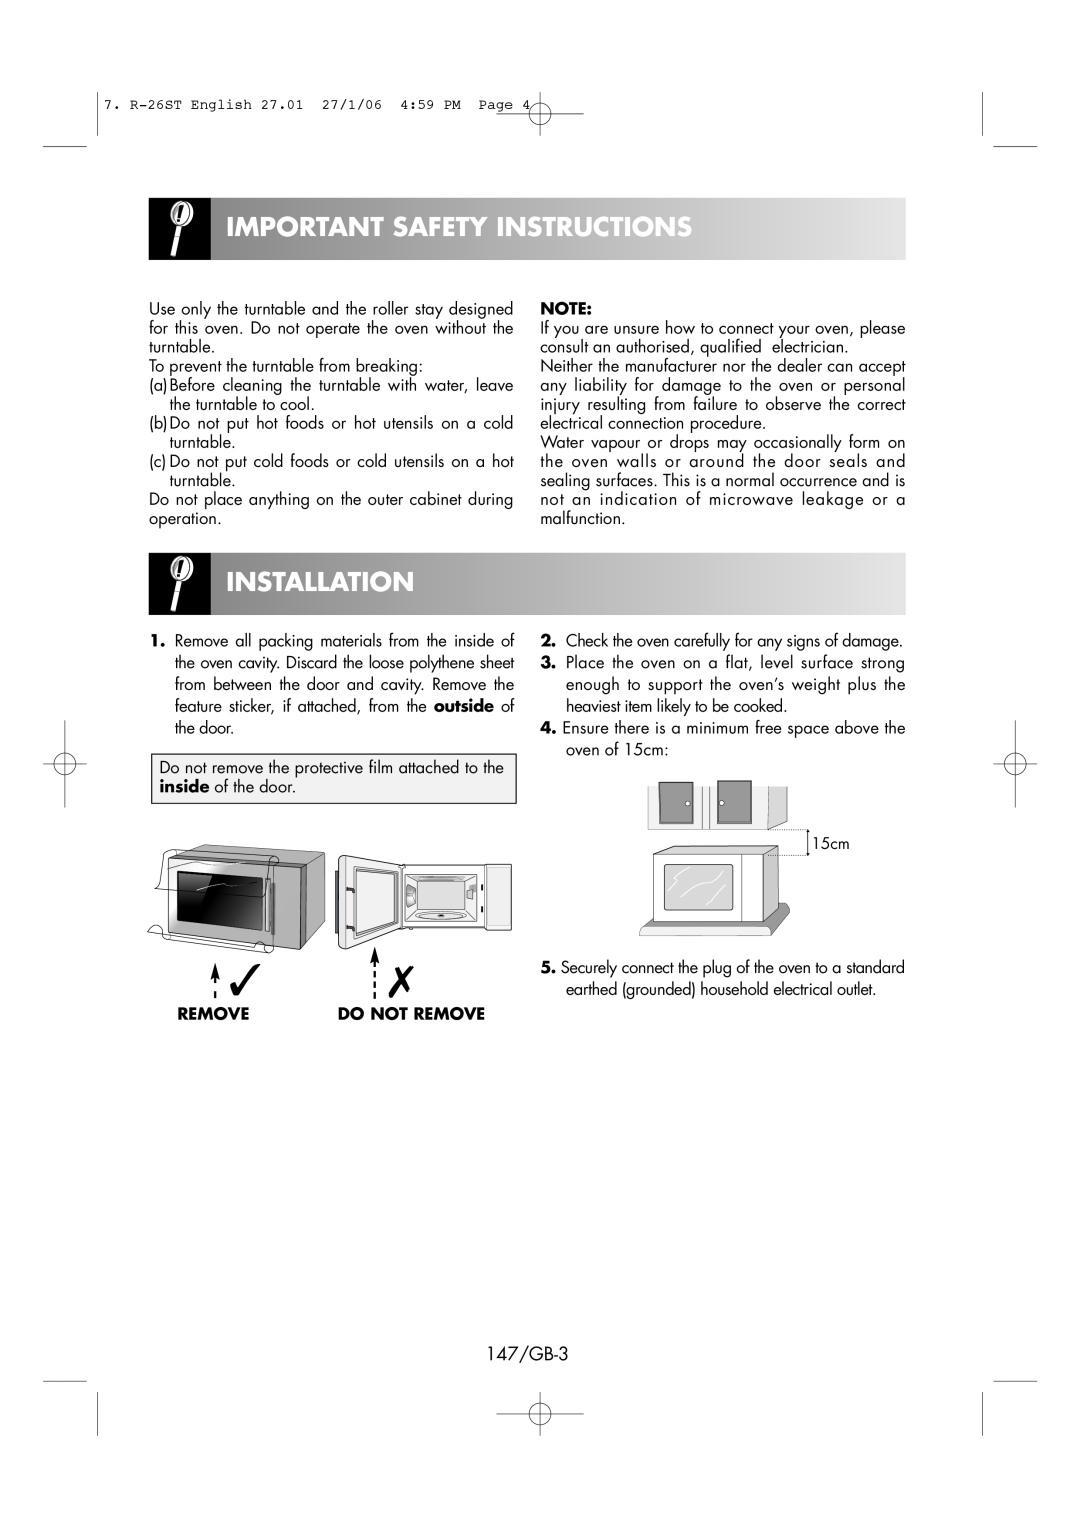 Sharp R-26ST manual Installation, Important Safety Instructions, 147/GB-3, Do Not Remove 